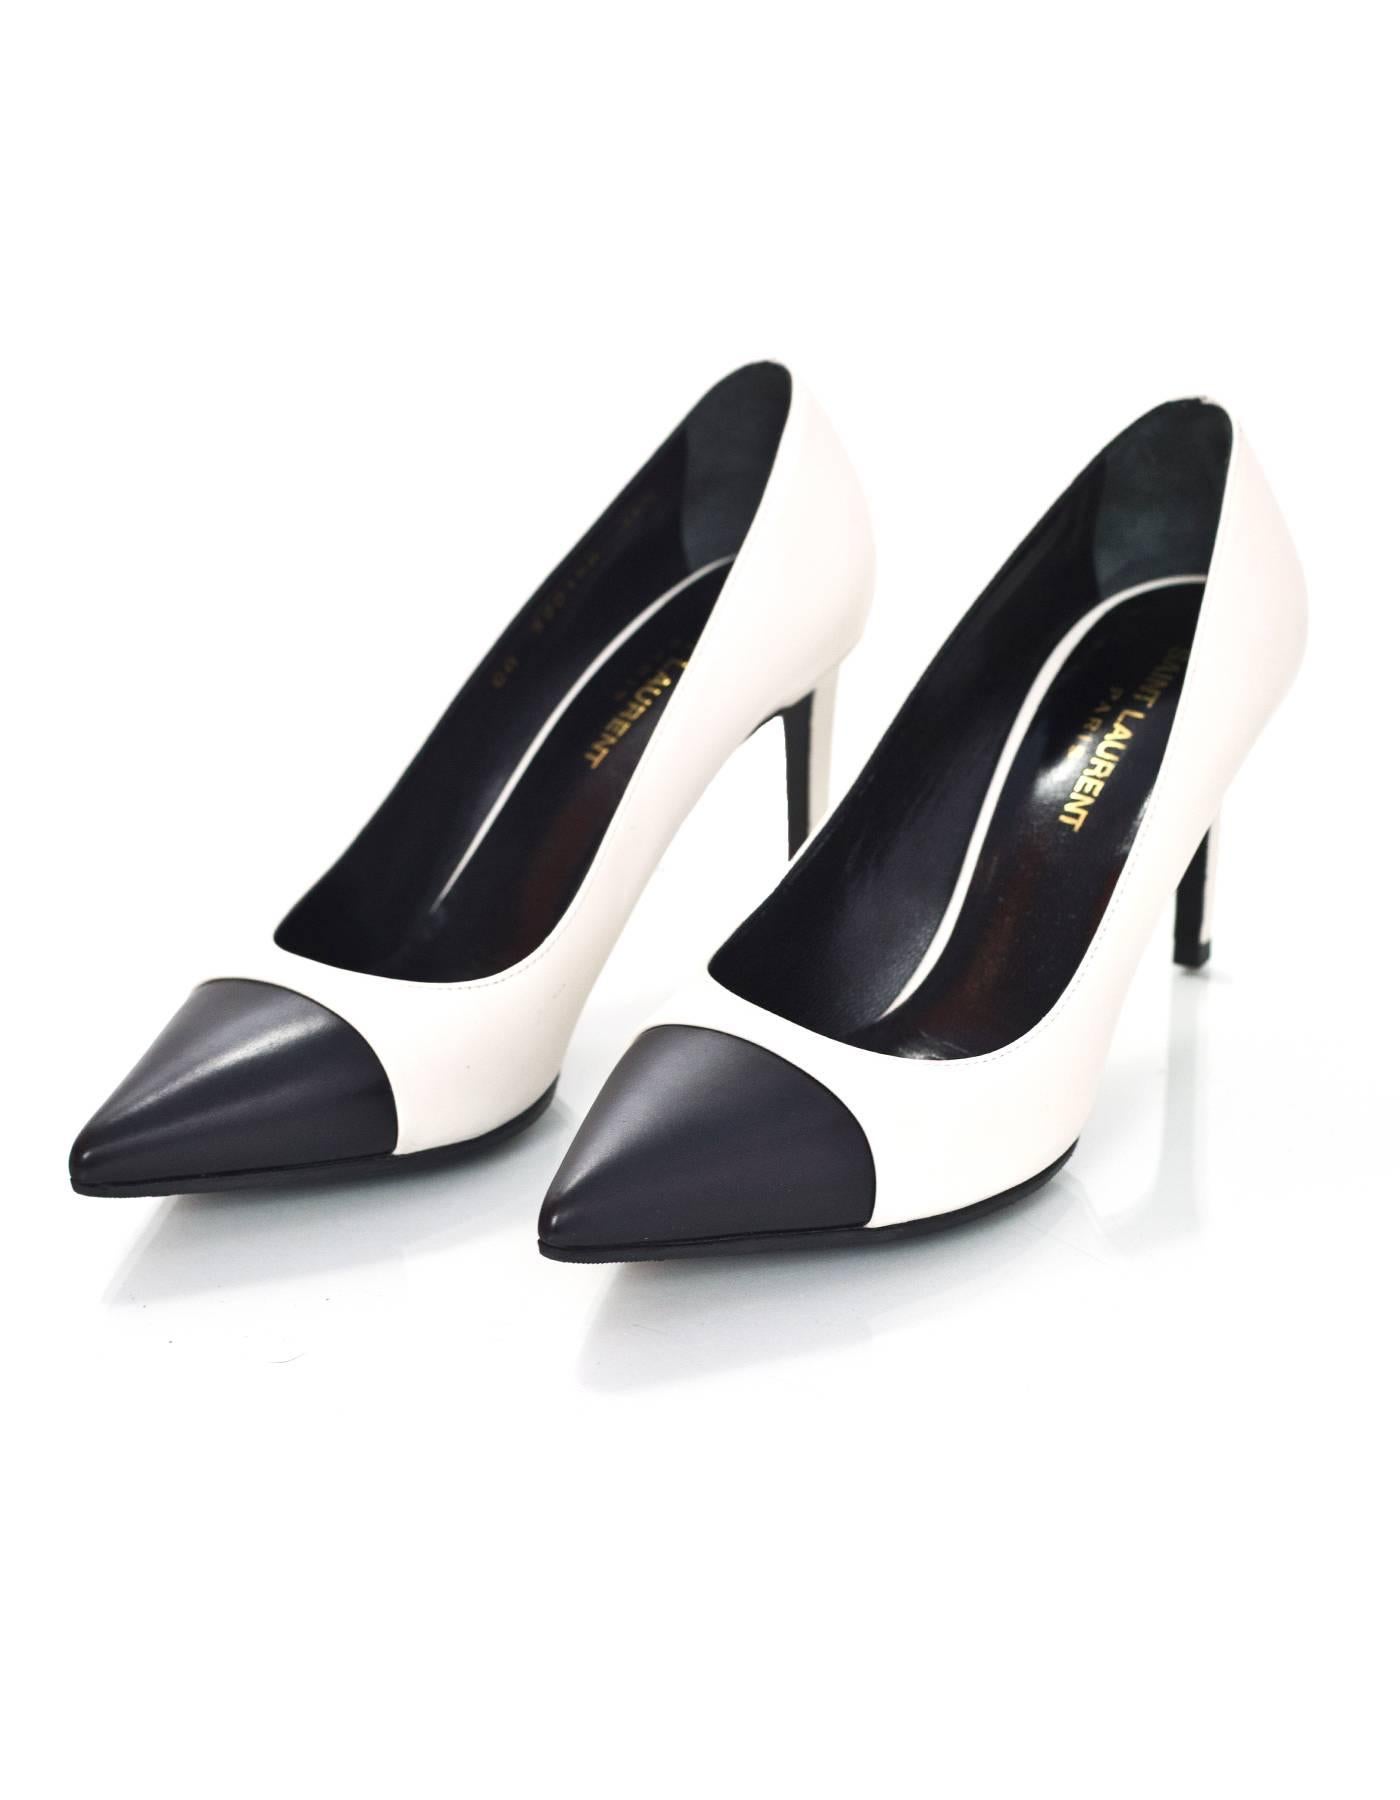 Saint Laurent White & Black Leather Pumps Sz 36.5

Made In: Italy
Color: White, black
Materials: Leather
Closure/Opening: Slide on
Sole Stamp: Saint Laurent Paris Made in Italy 36.5
Retail Price: $665 + tax
Overall Condition: Excellent pre-owned